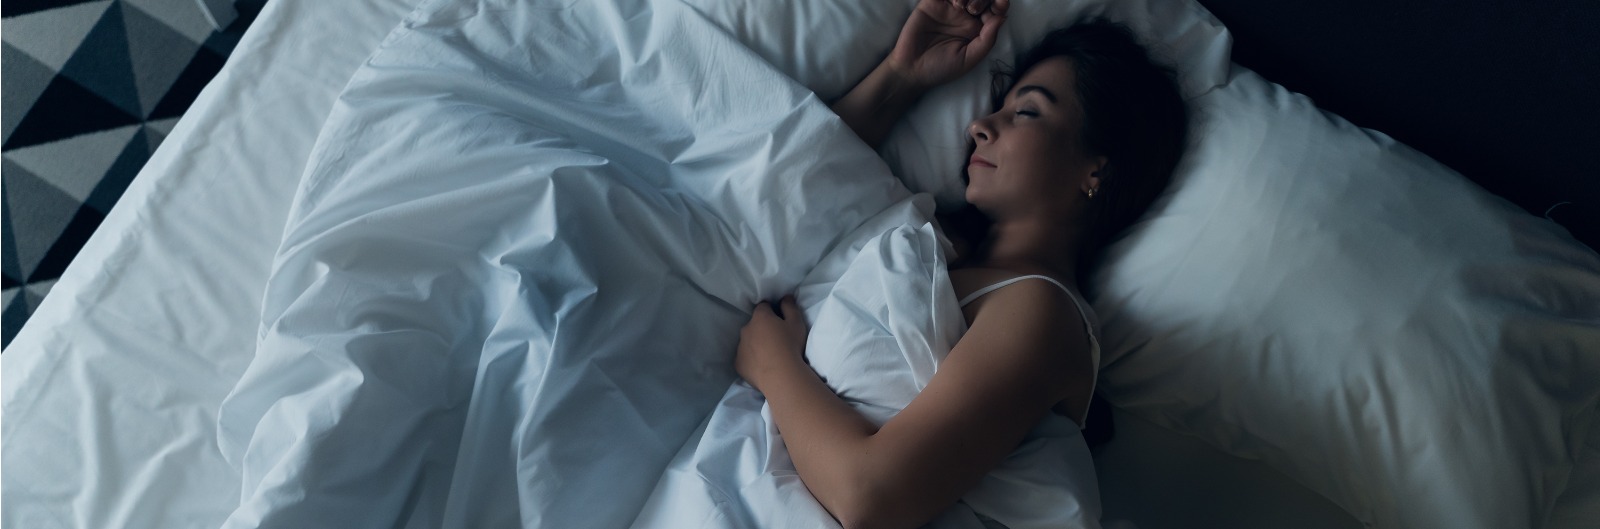 young-beautiful-girl-or-woman-sleeping-alone-in-big-bed-at-night-top-picture-1600x529.jpg